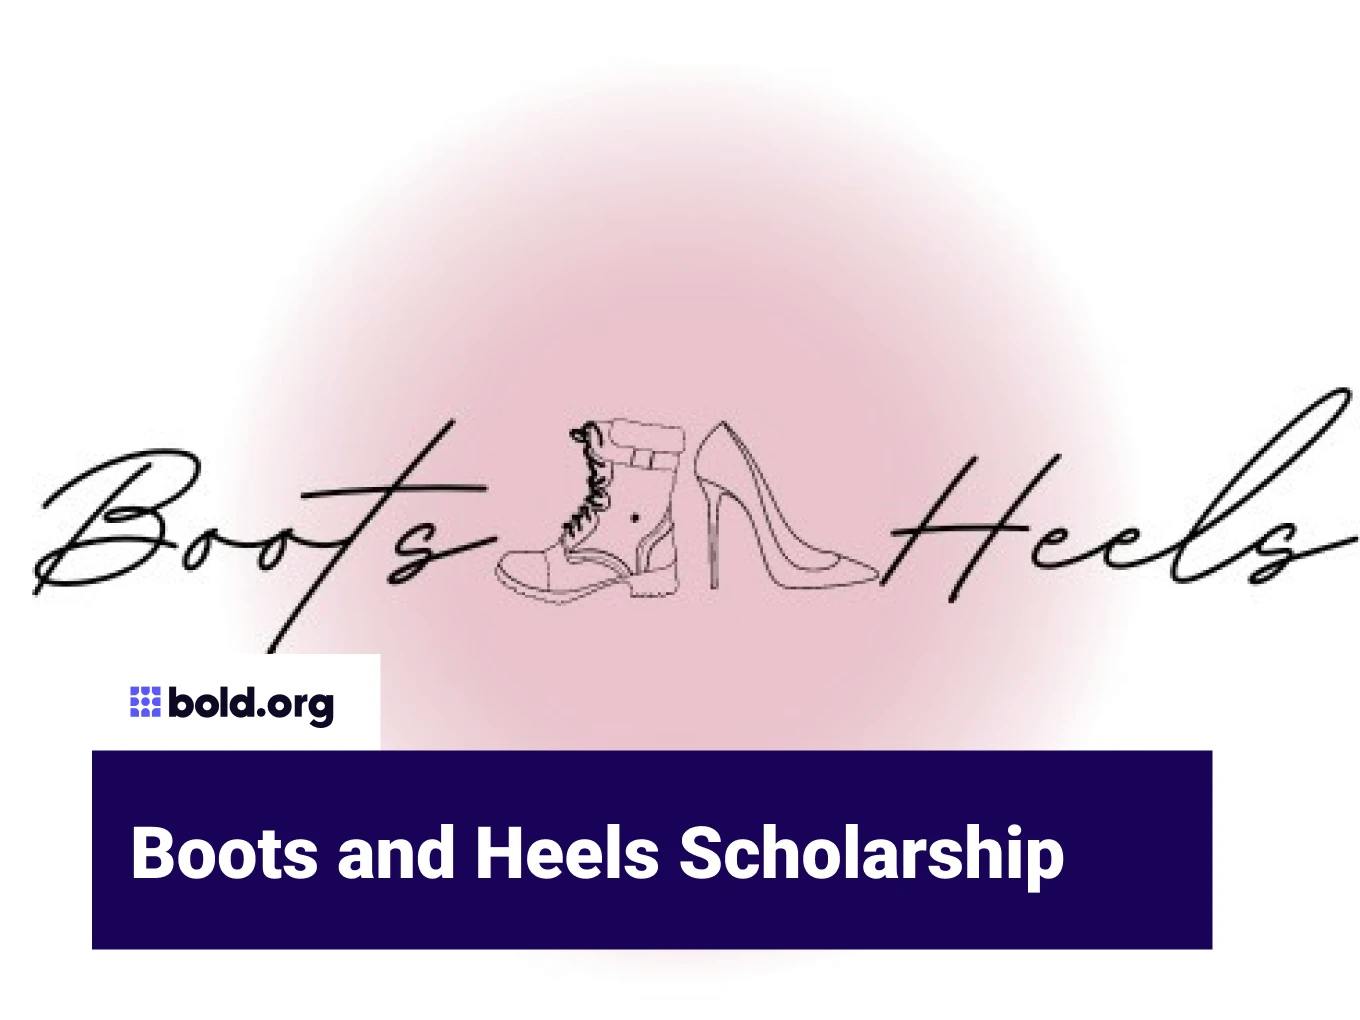 Boots and Heels Scholarship